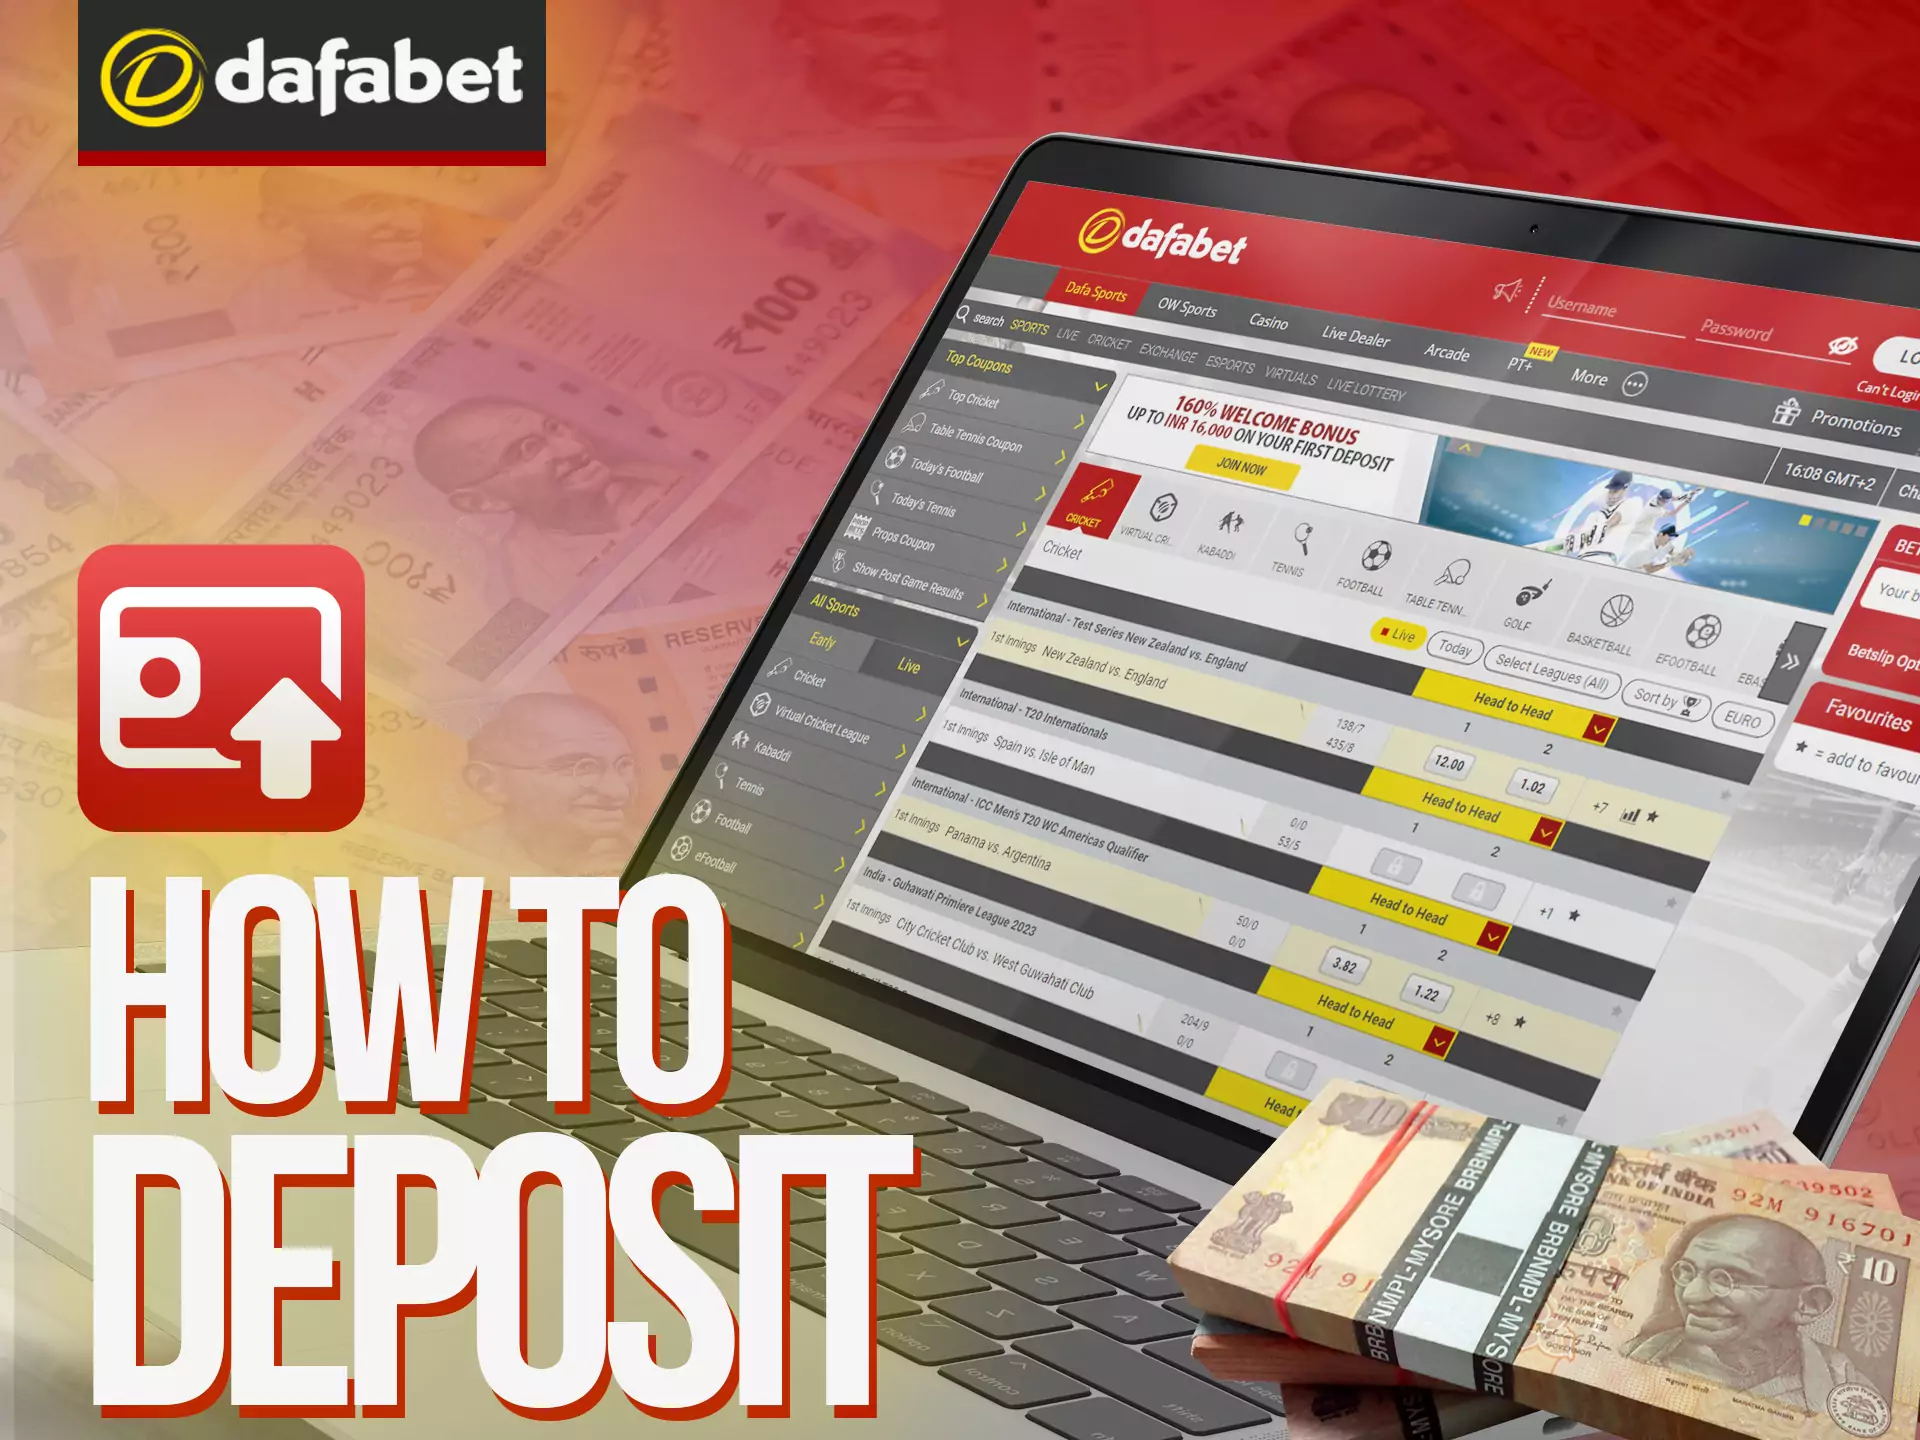 Find out how you can deposit money into your Dafabet account.